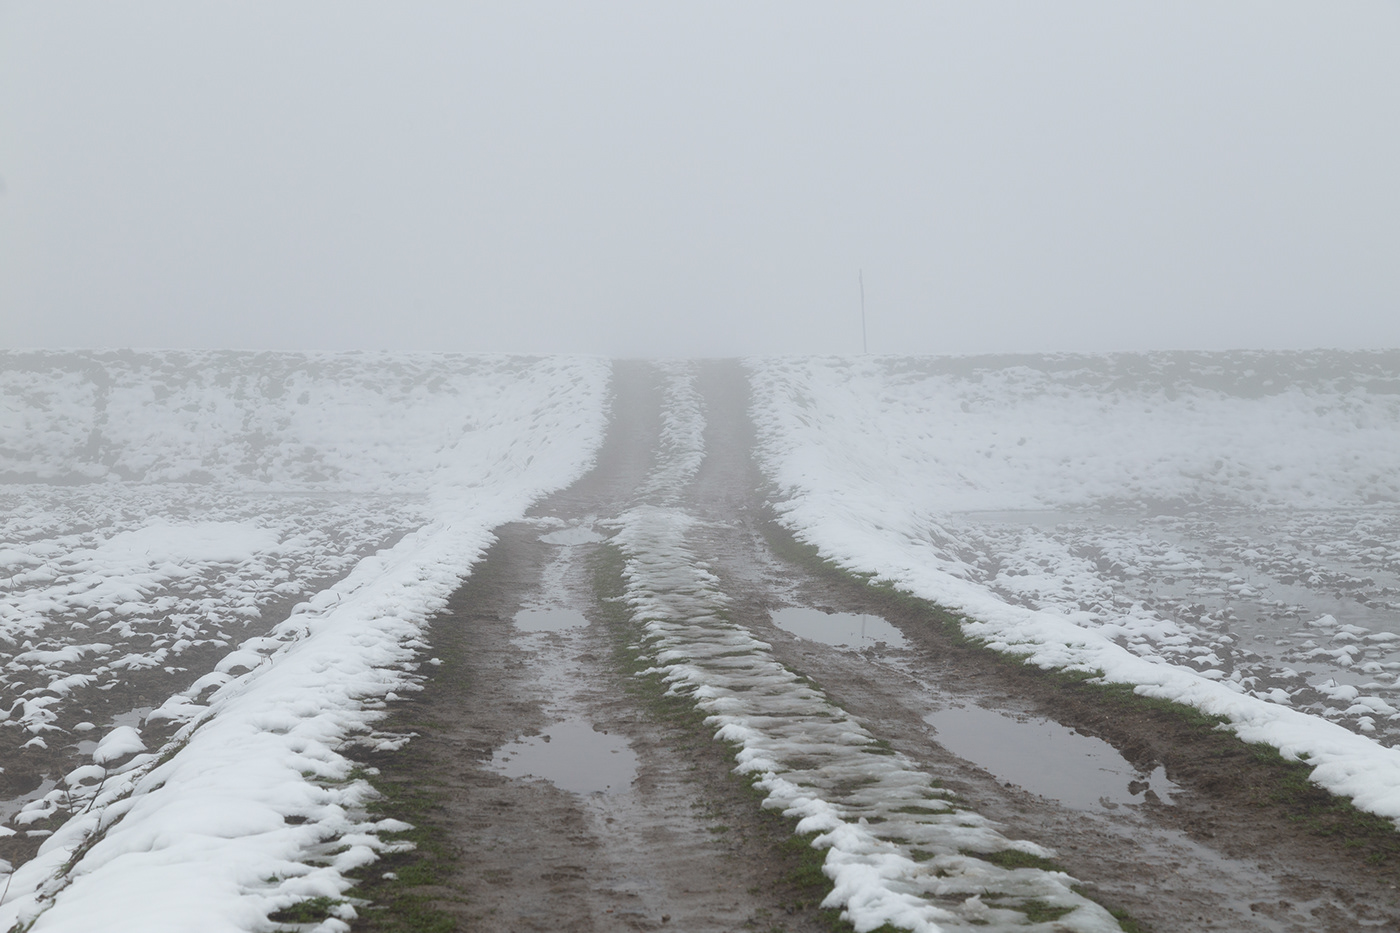 snowy country road in the mist